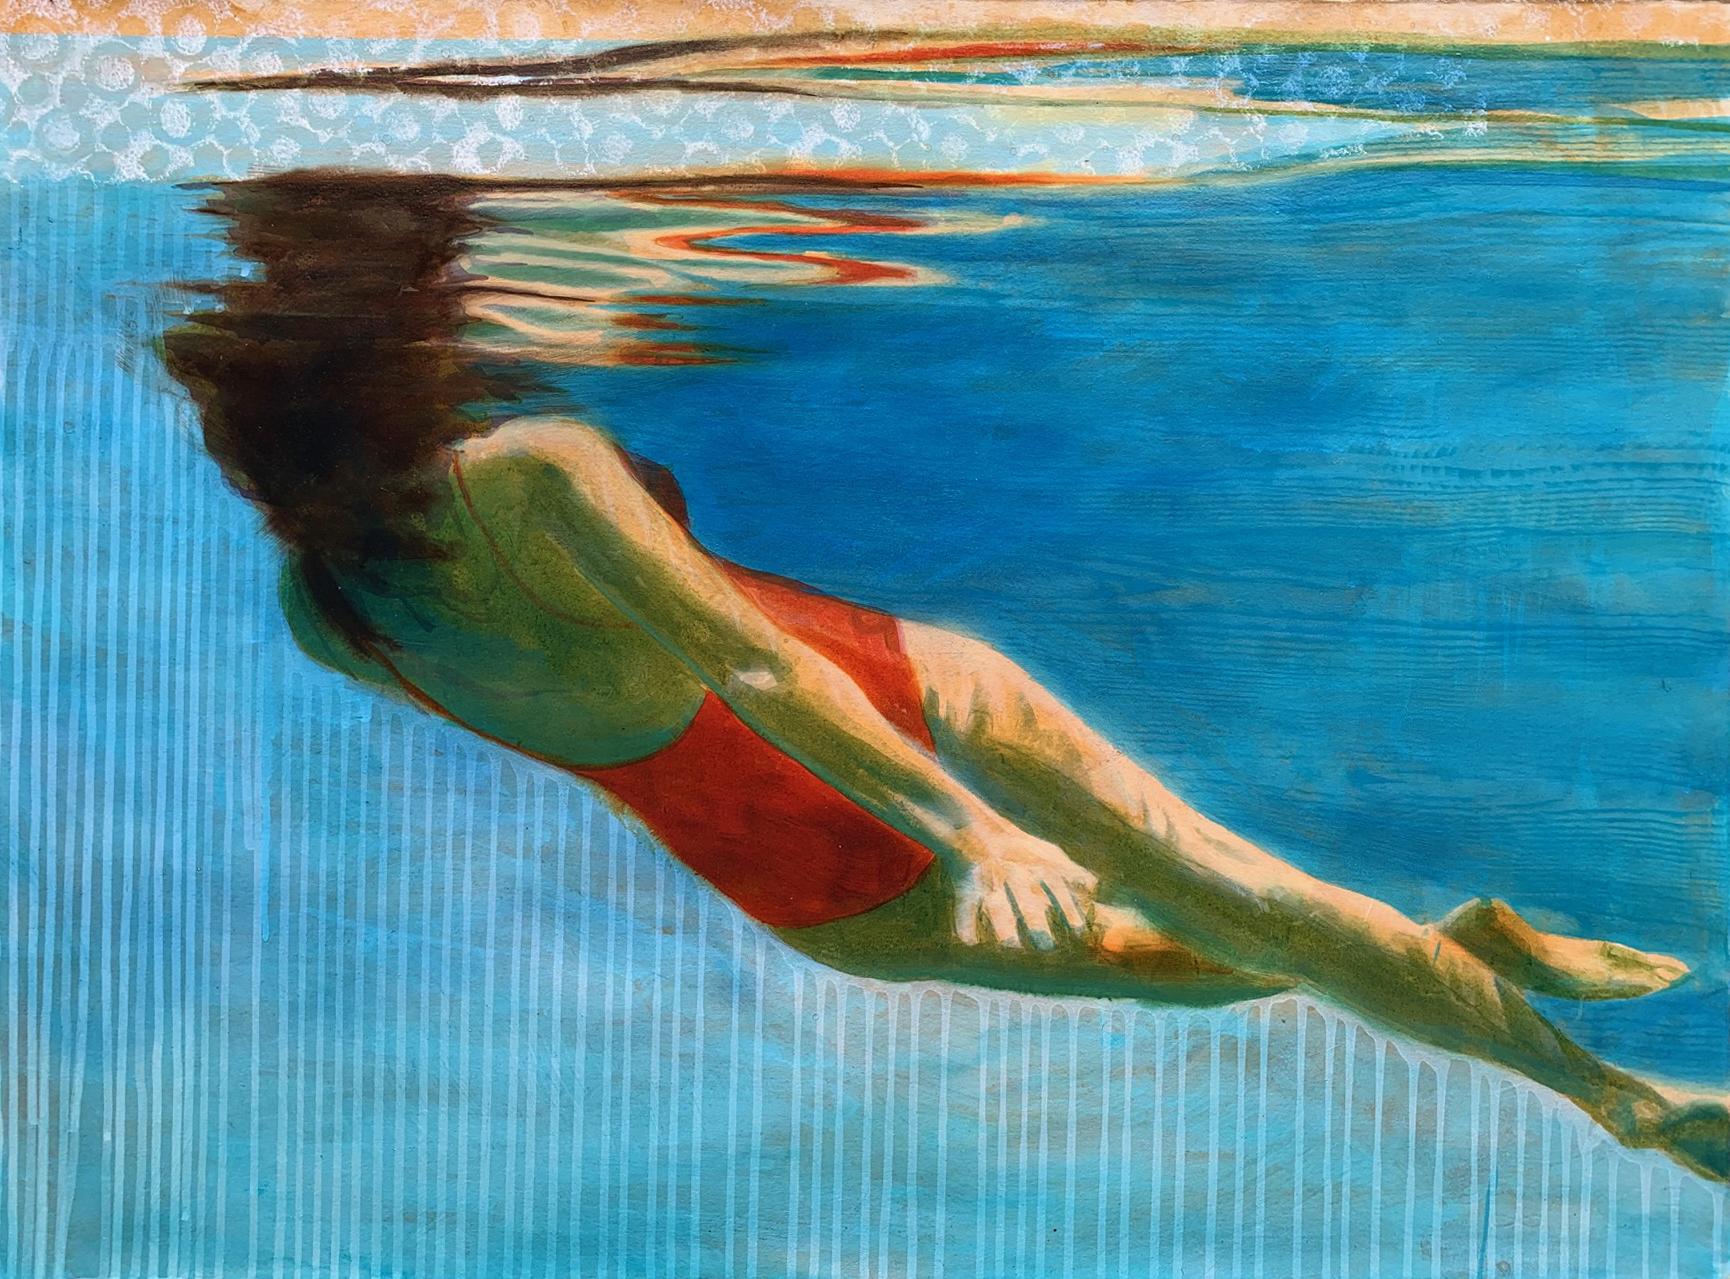 Carol Bennett Figurative Painting - "Oddballing (paper)" Acrylic painting of a woman swimming in a red bathing suit